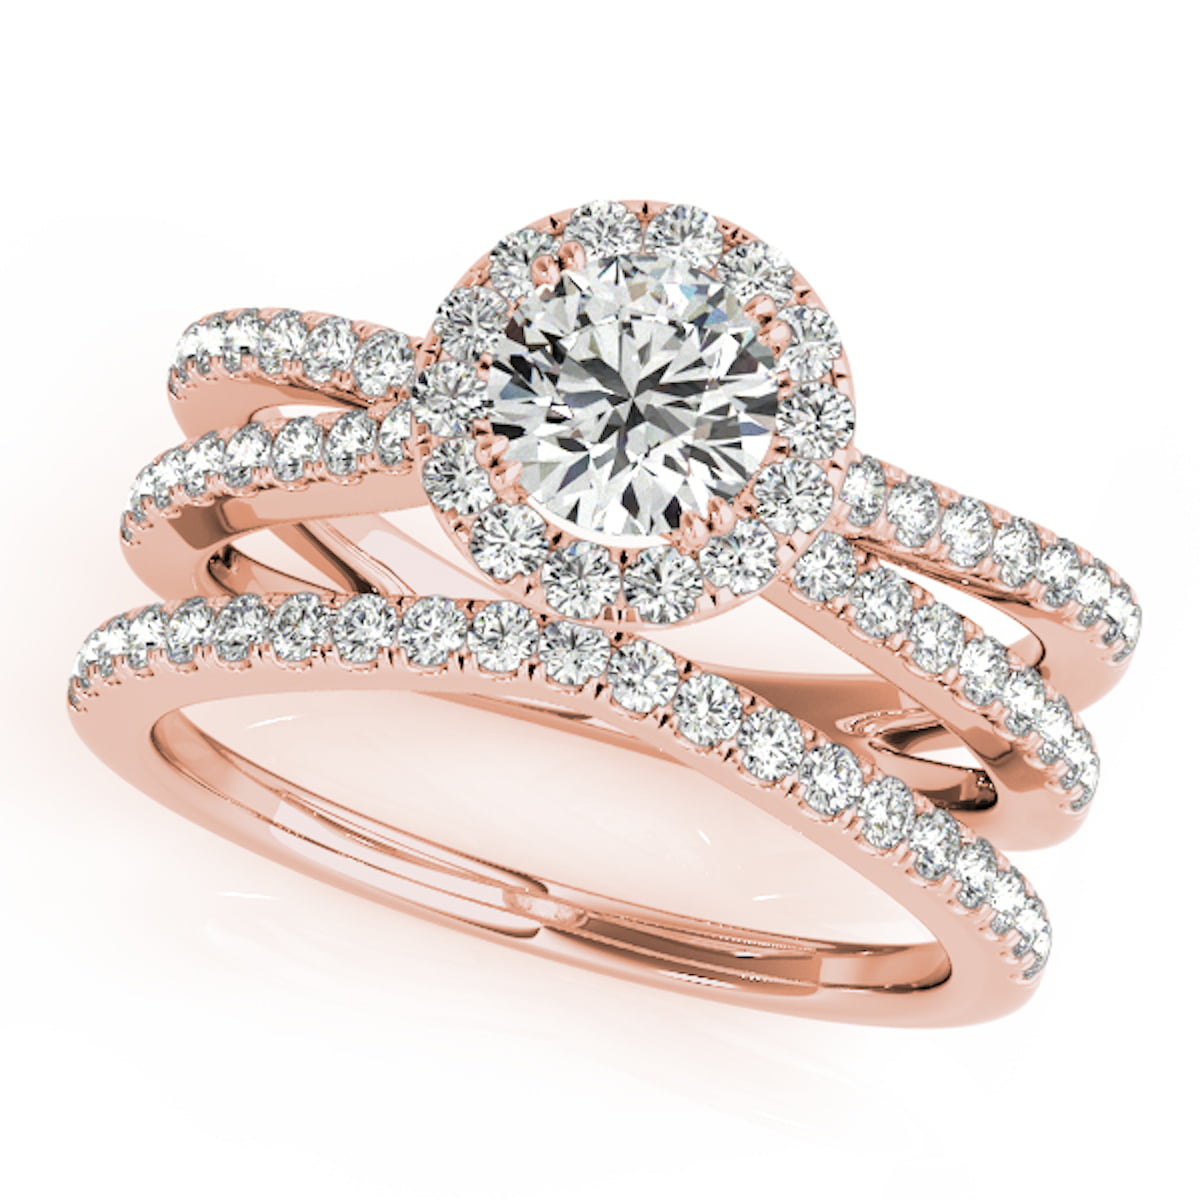 Aonejewelry - 1 Carat Halo Daimond Engagement Bridal Ring Set 14K Solid ...